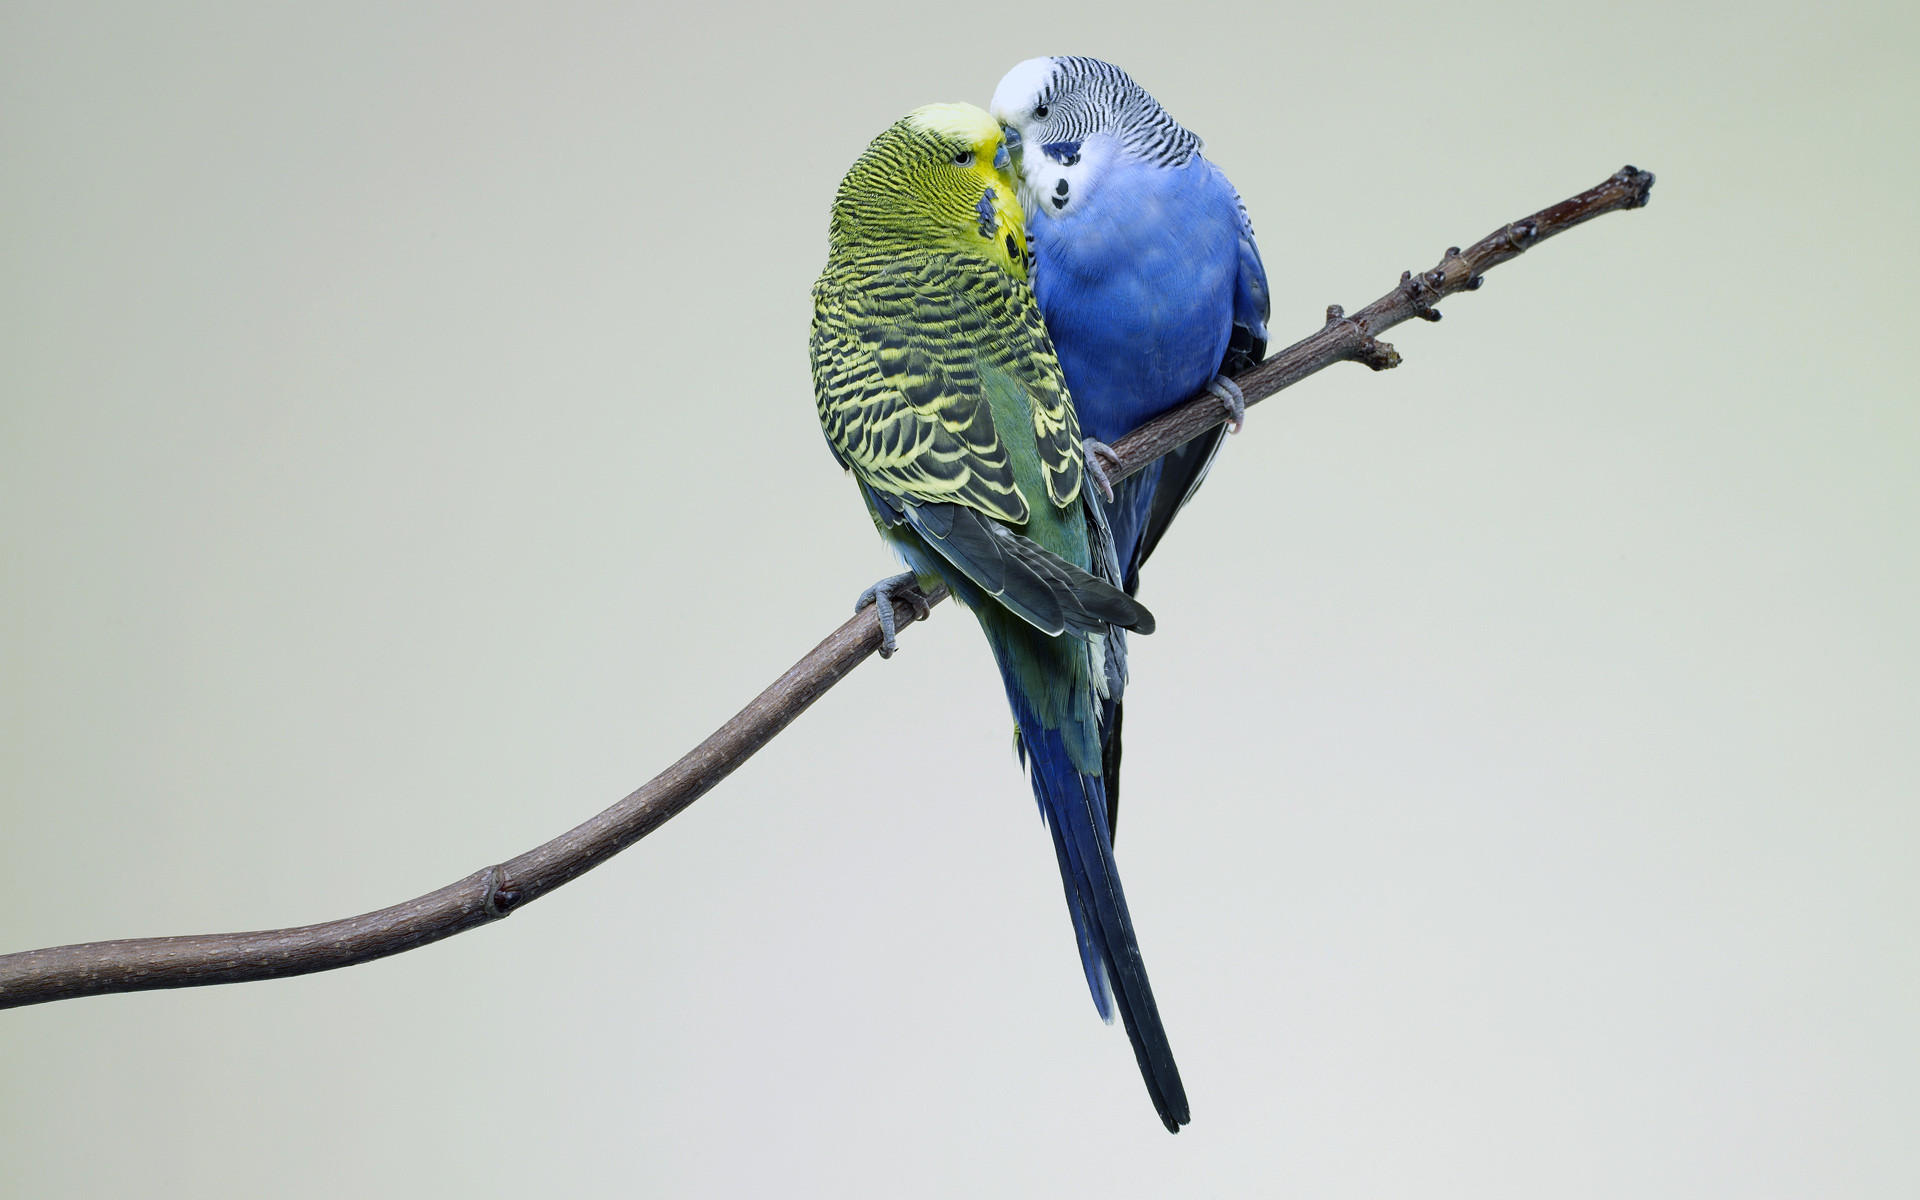 1920x1200 Budgies images 2 Budgies HD wallpaper and background photos